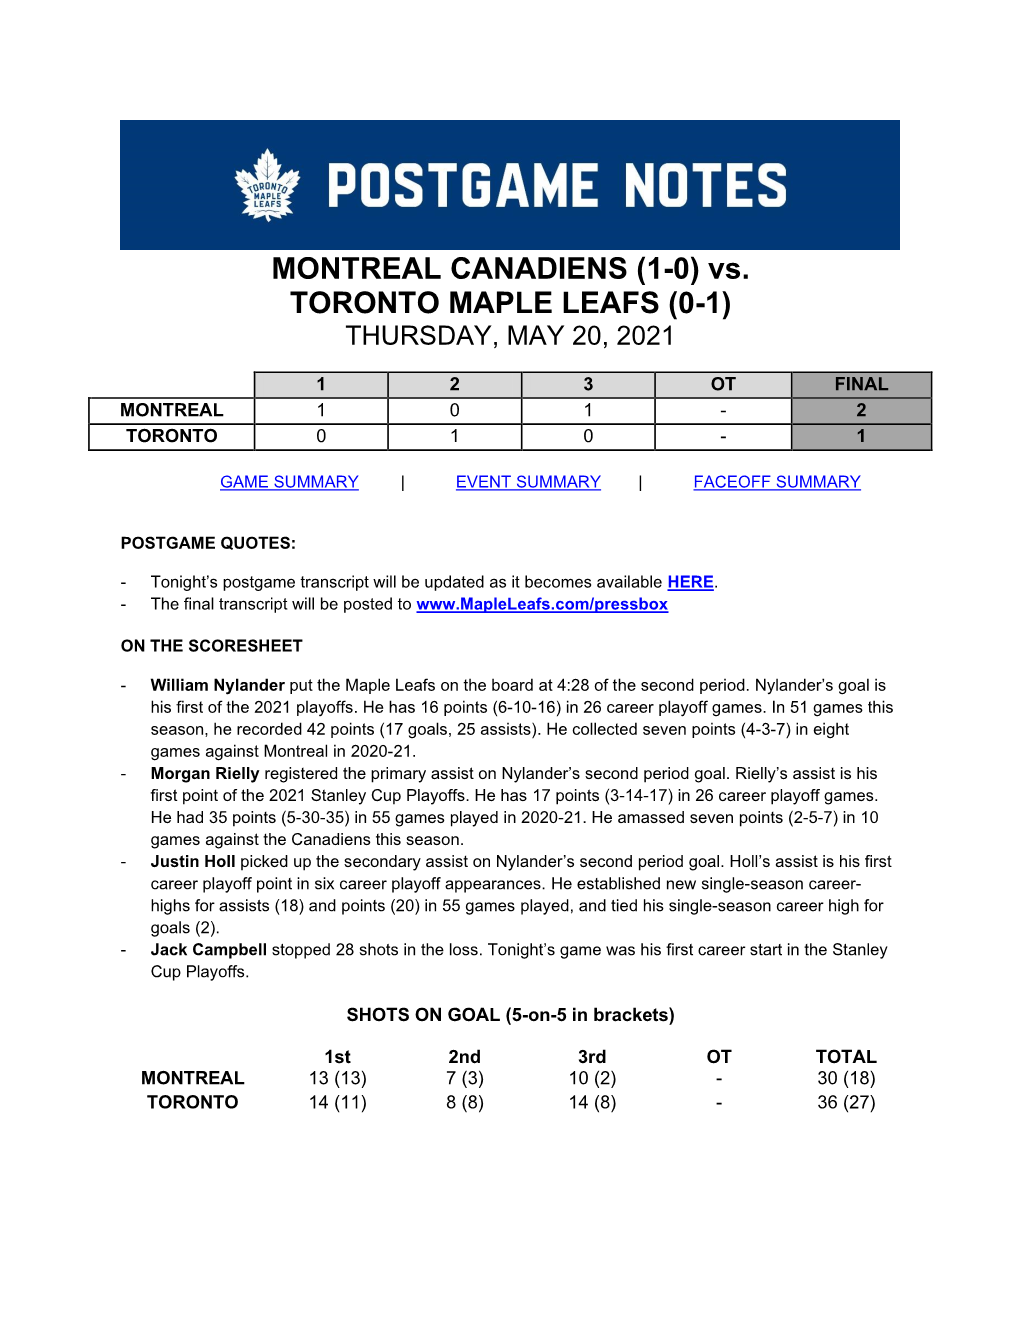 MONTREAL CANADIENS (1-0) Vs. TORONTO MAPLE LEAFS (0-1) THURSDAY, MAY 20, 2021